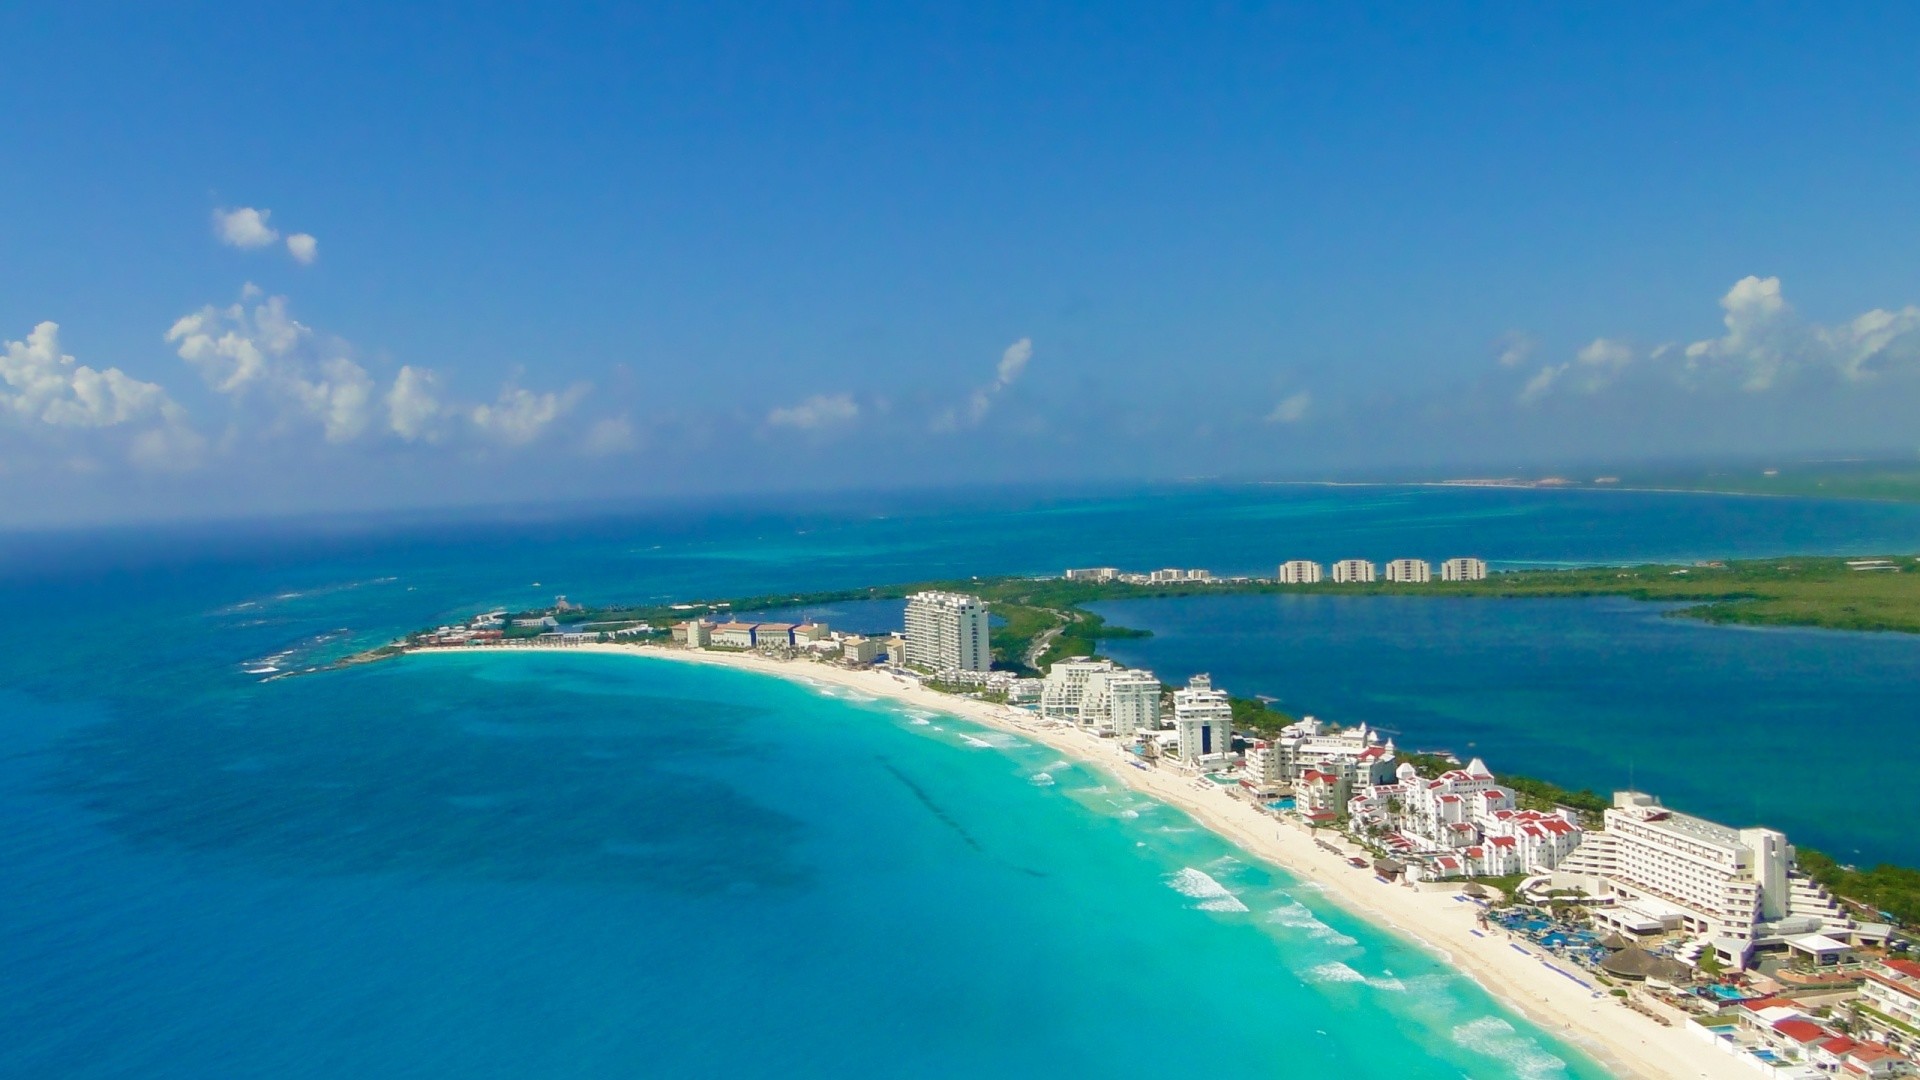 1920x1080 Related Wallpapers from Free Summer Screensavers. Beautiful Cancun Beach  Pictures